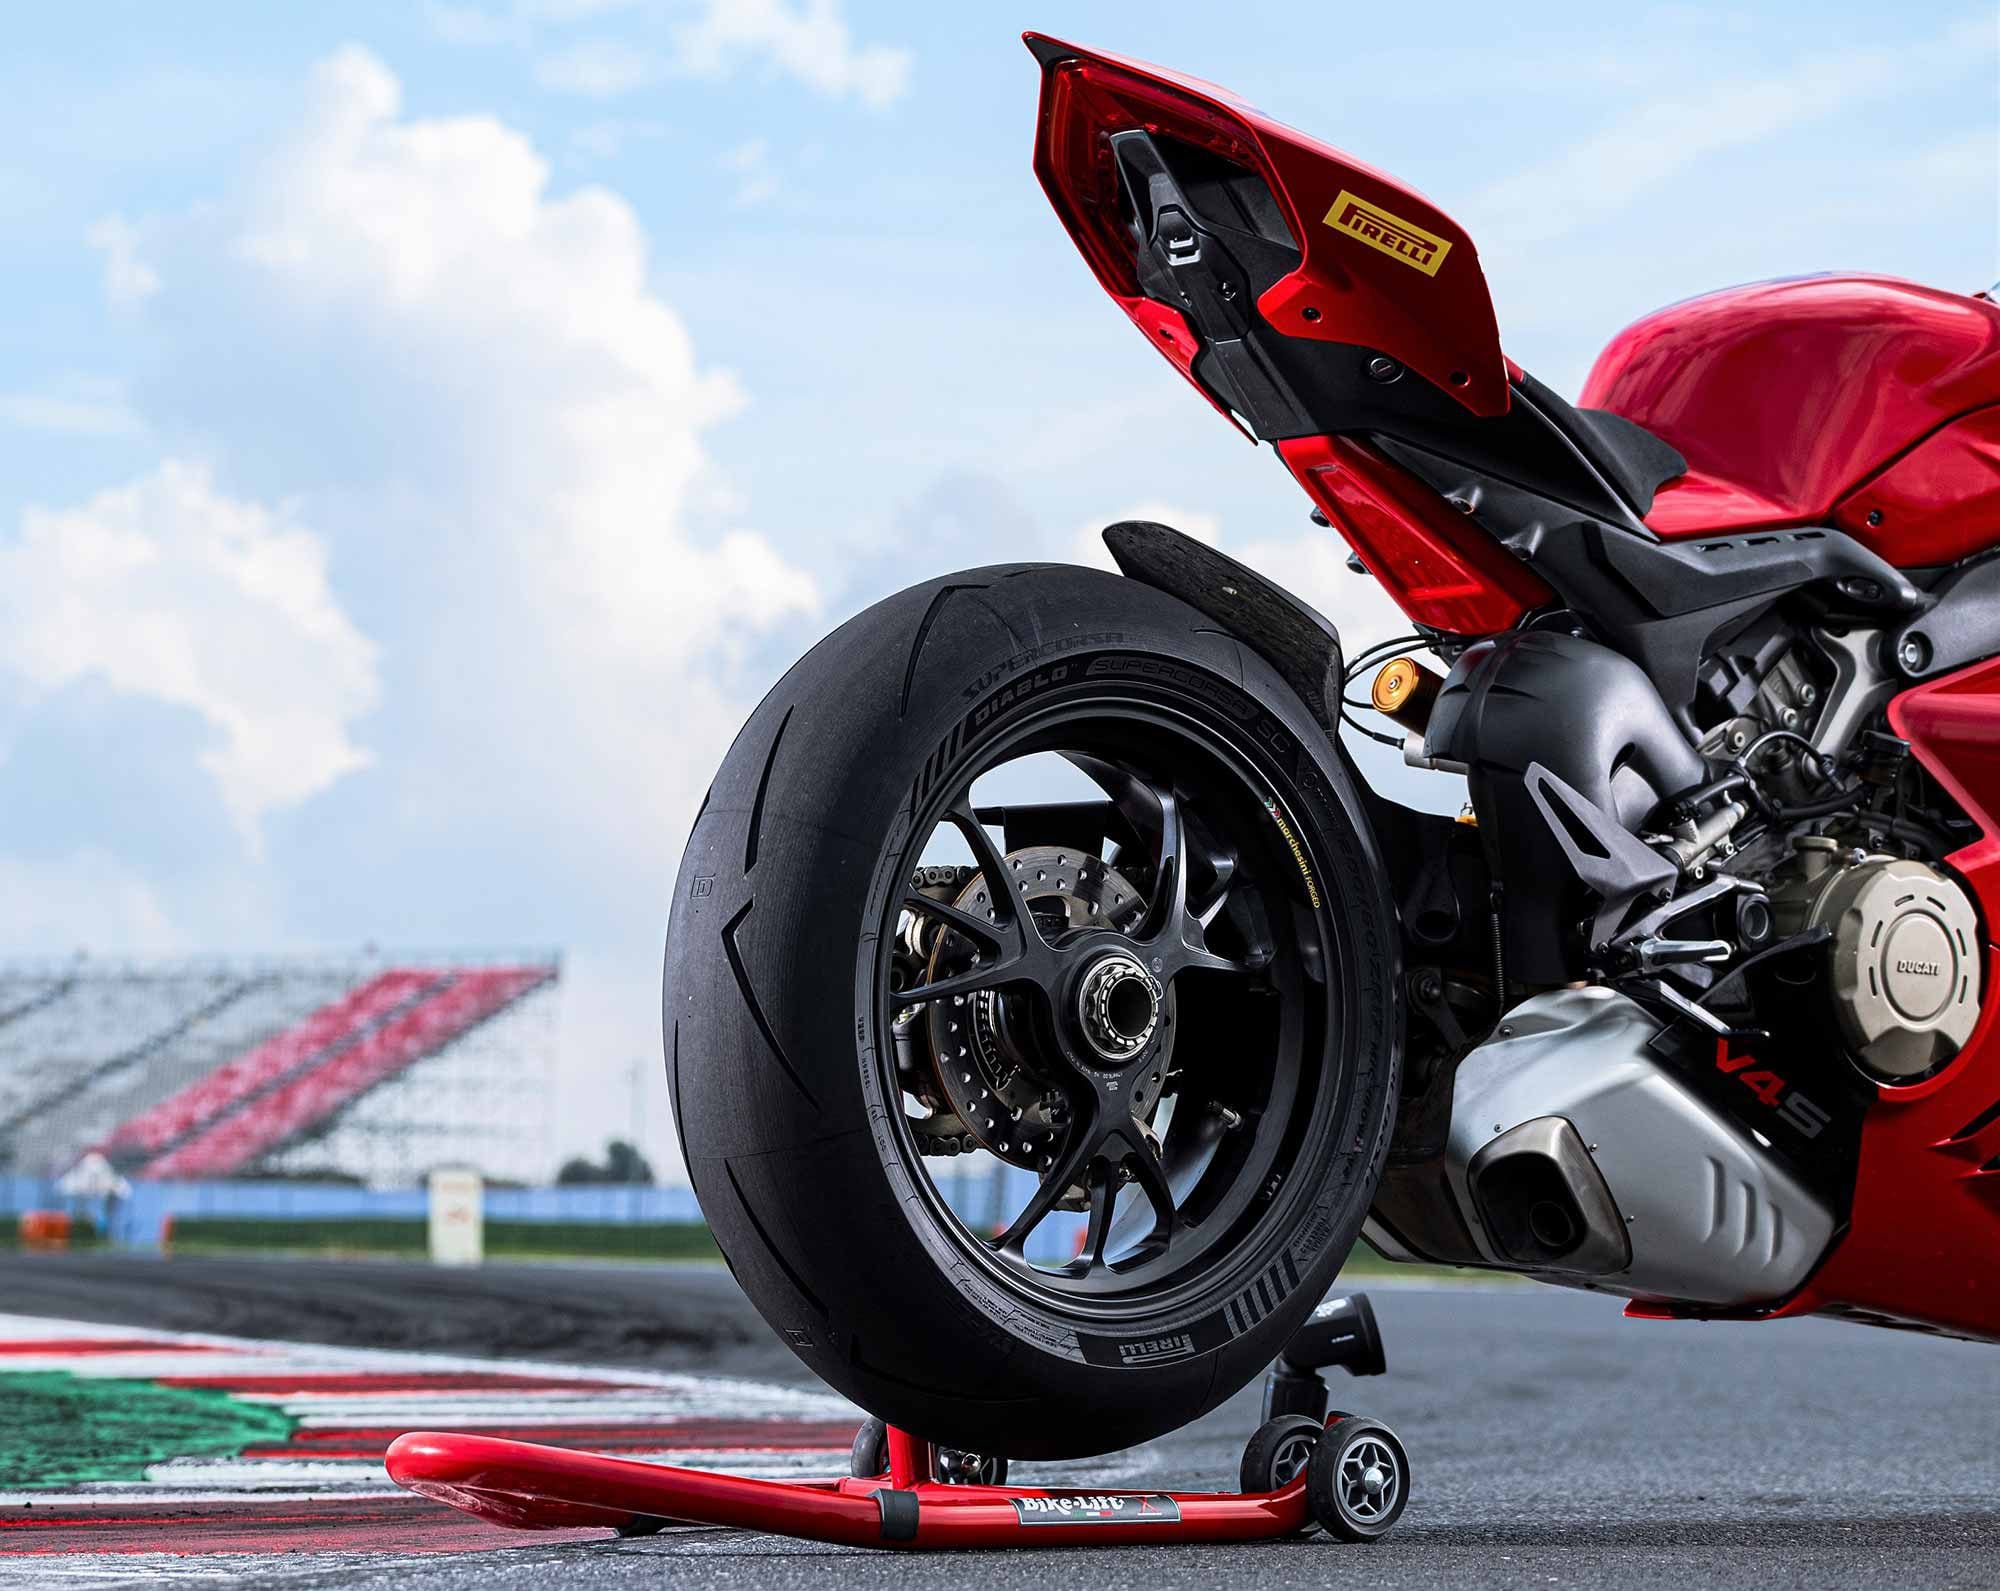 Pirelli has leveraged decades of World Superbike racing experience to develop its latest Diablo Supercorsa sport tires.